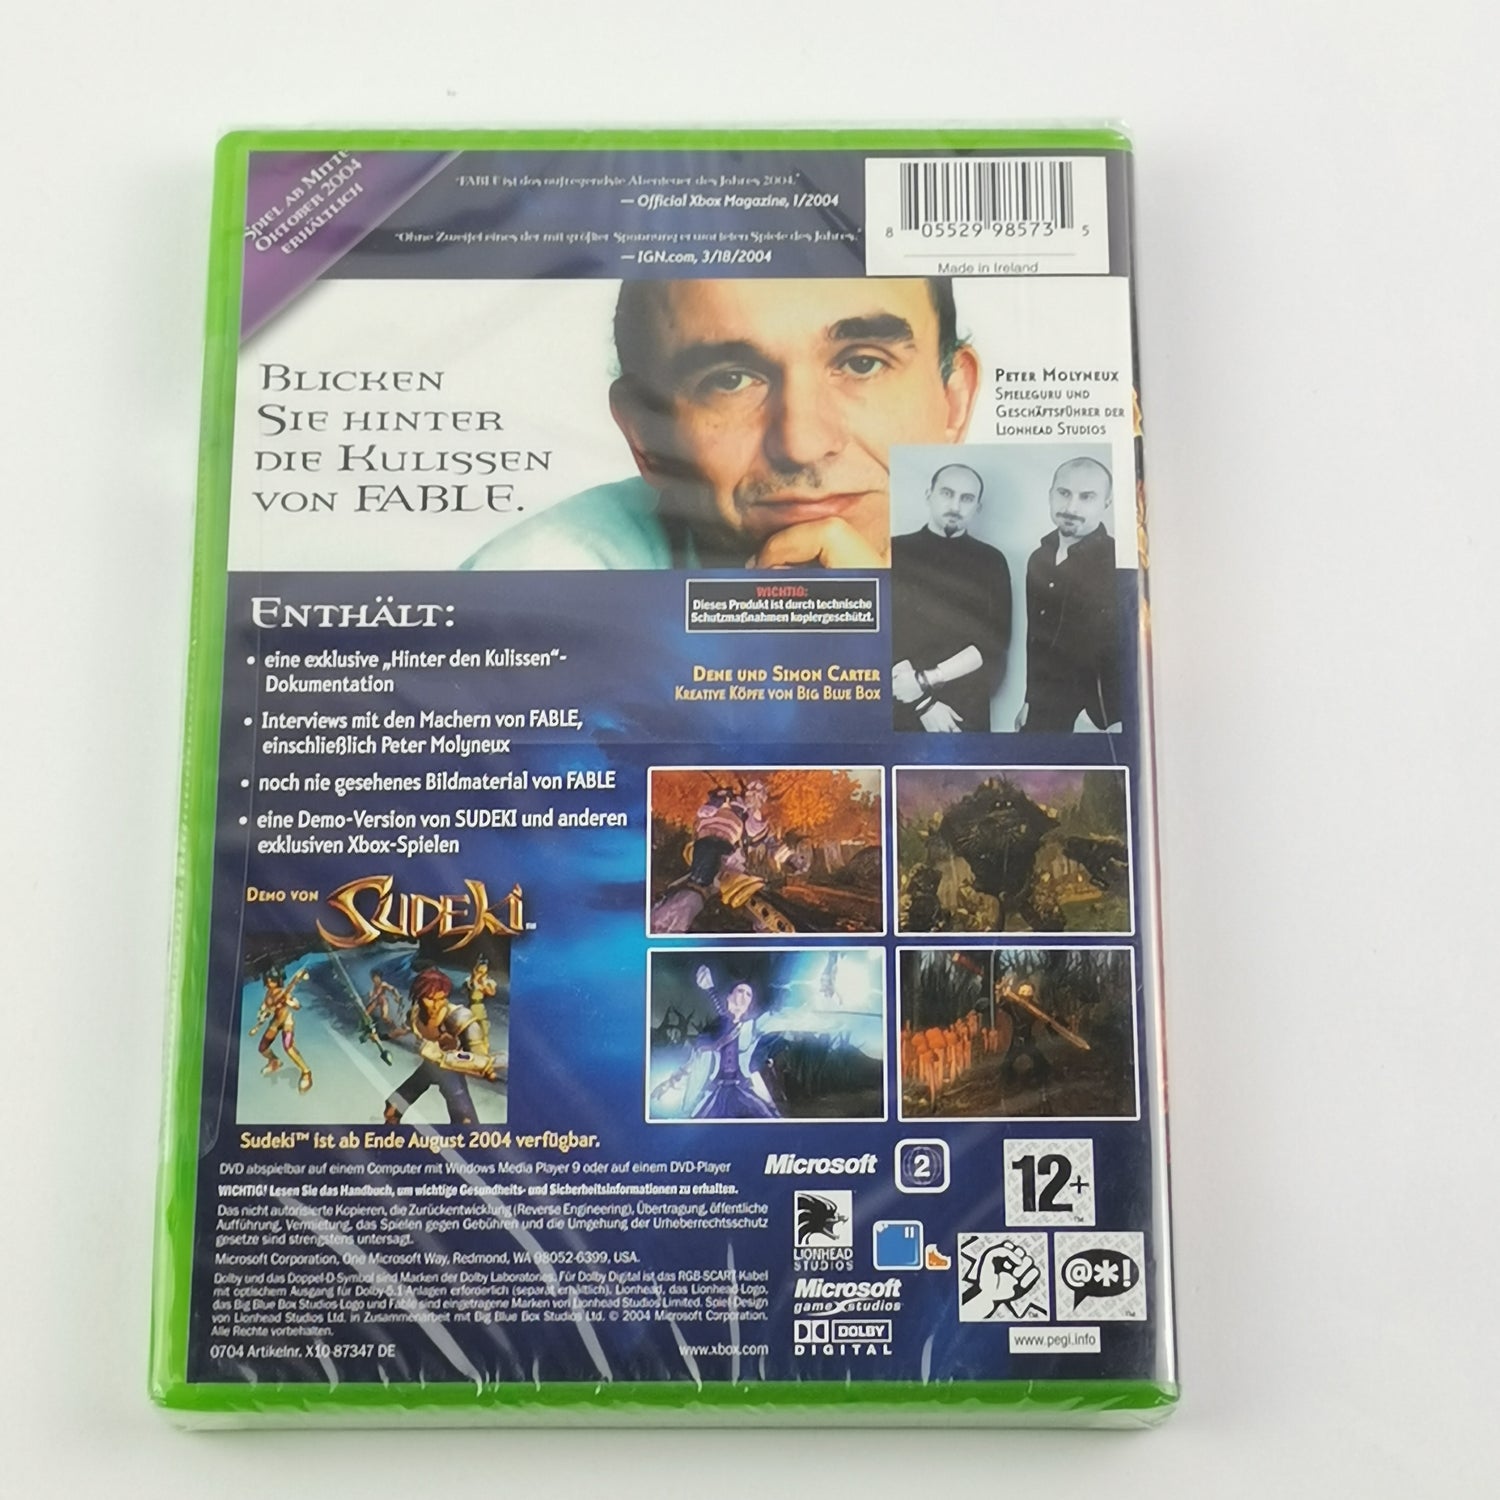 Microsoft Xbox Classic Game: Fable Limited Edition Bonus DvD - NEW SEALED OVP